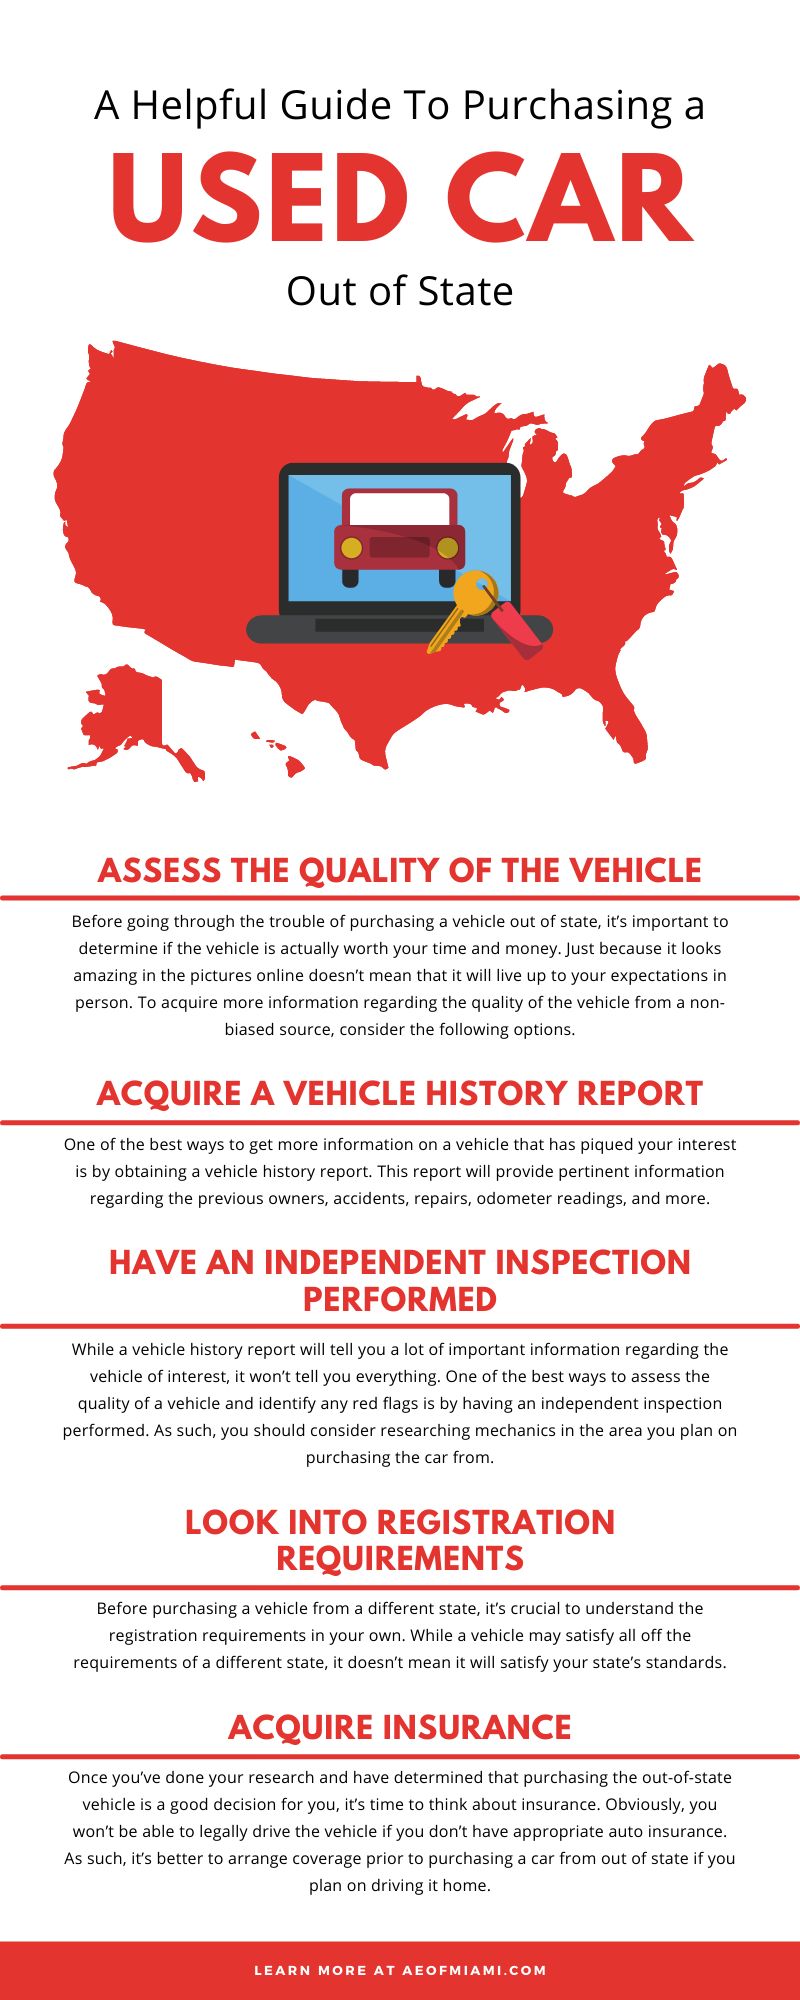 A Helpful Guide To Purchasing a Used Car Out of State